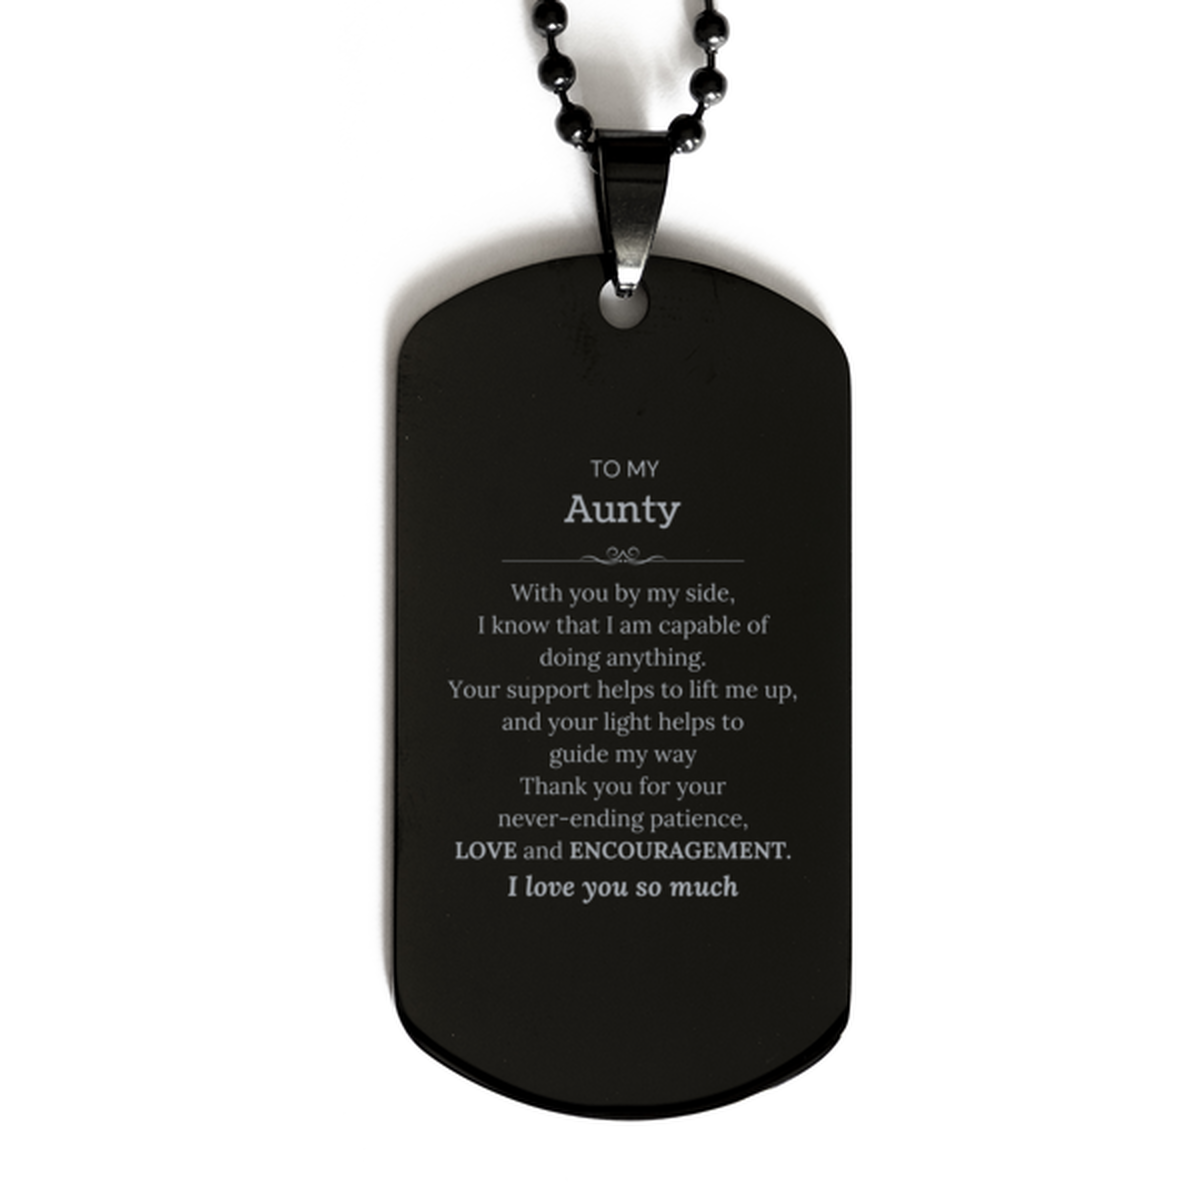 Appreciation Aunty Black Dog Tag Gifts, To My Aunty Birthday Christmas Wedding Keepsake Gifts for Aunty With you by my side, I know that I am capable of doing anything. I love you so much